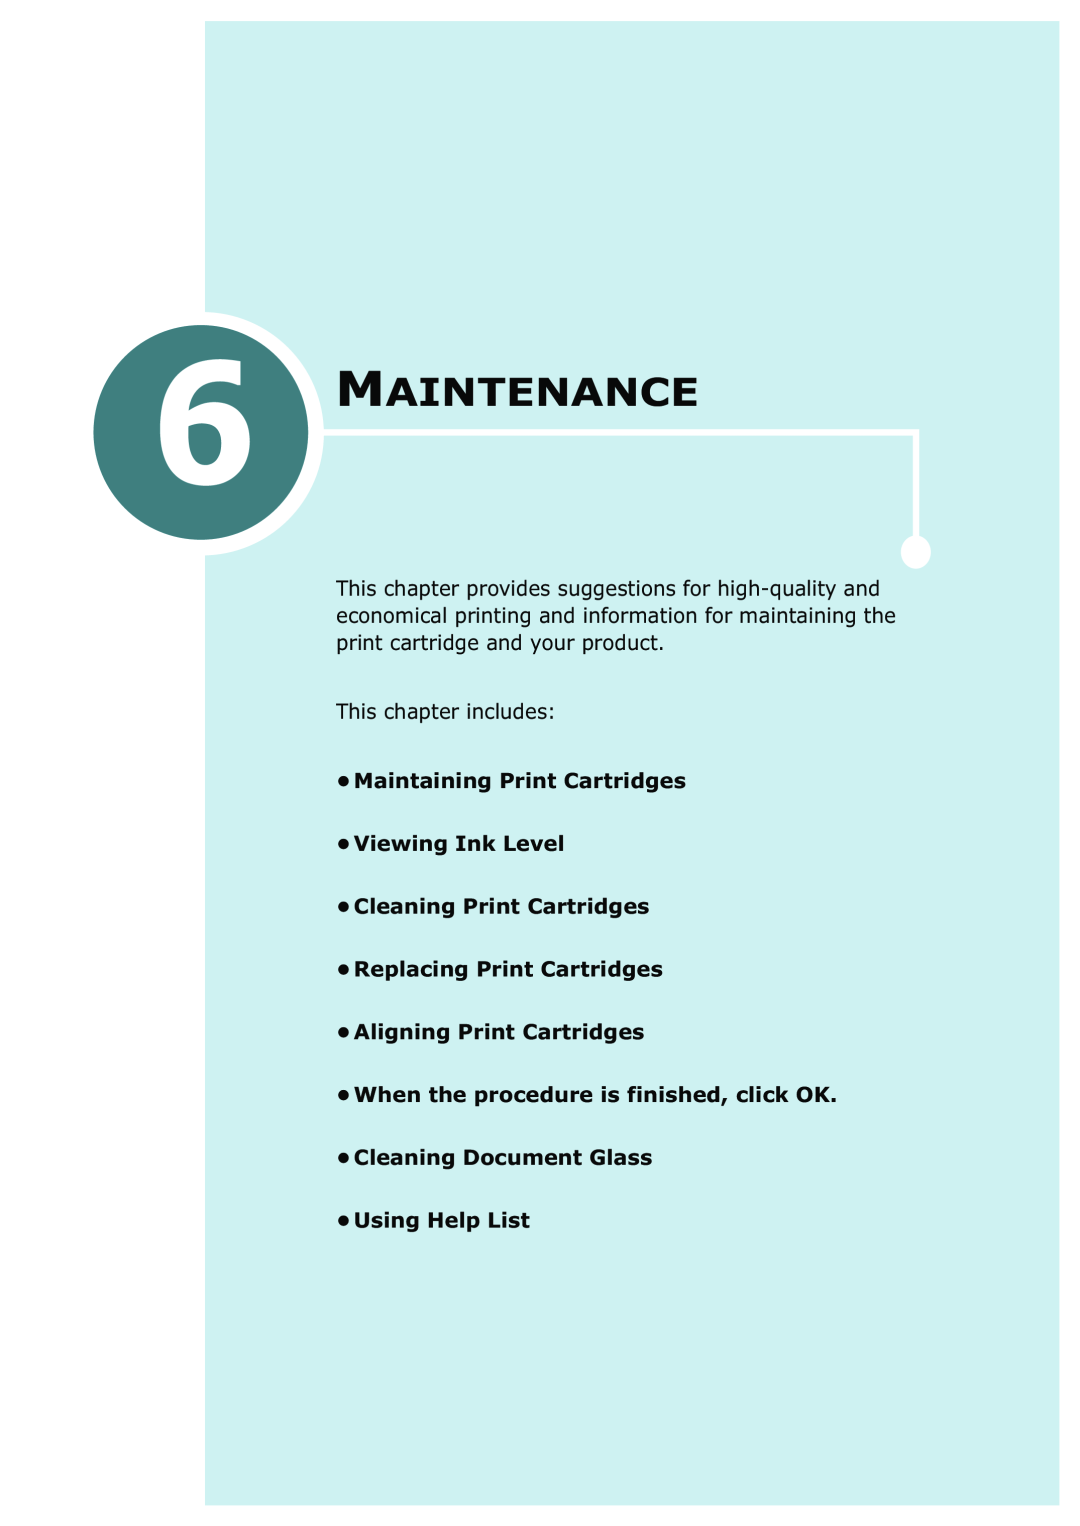 Samsung SCX-1100 Maintenance, Maintaining Print Cartridges Viewing Ink Level, Cleaning Document Glass Using Help List 